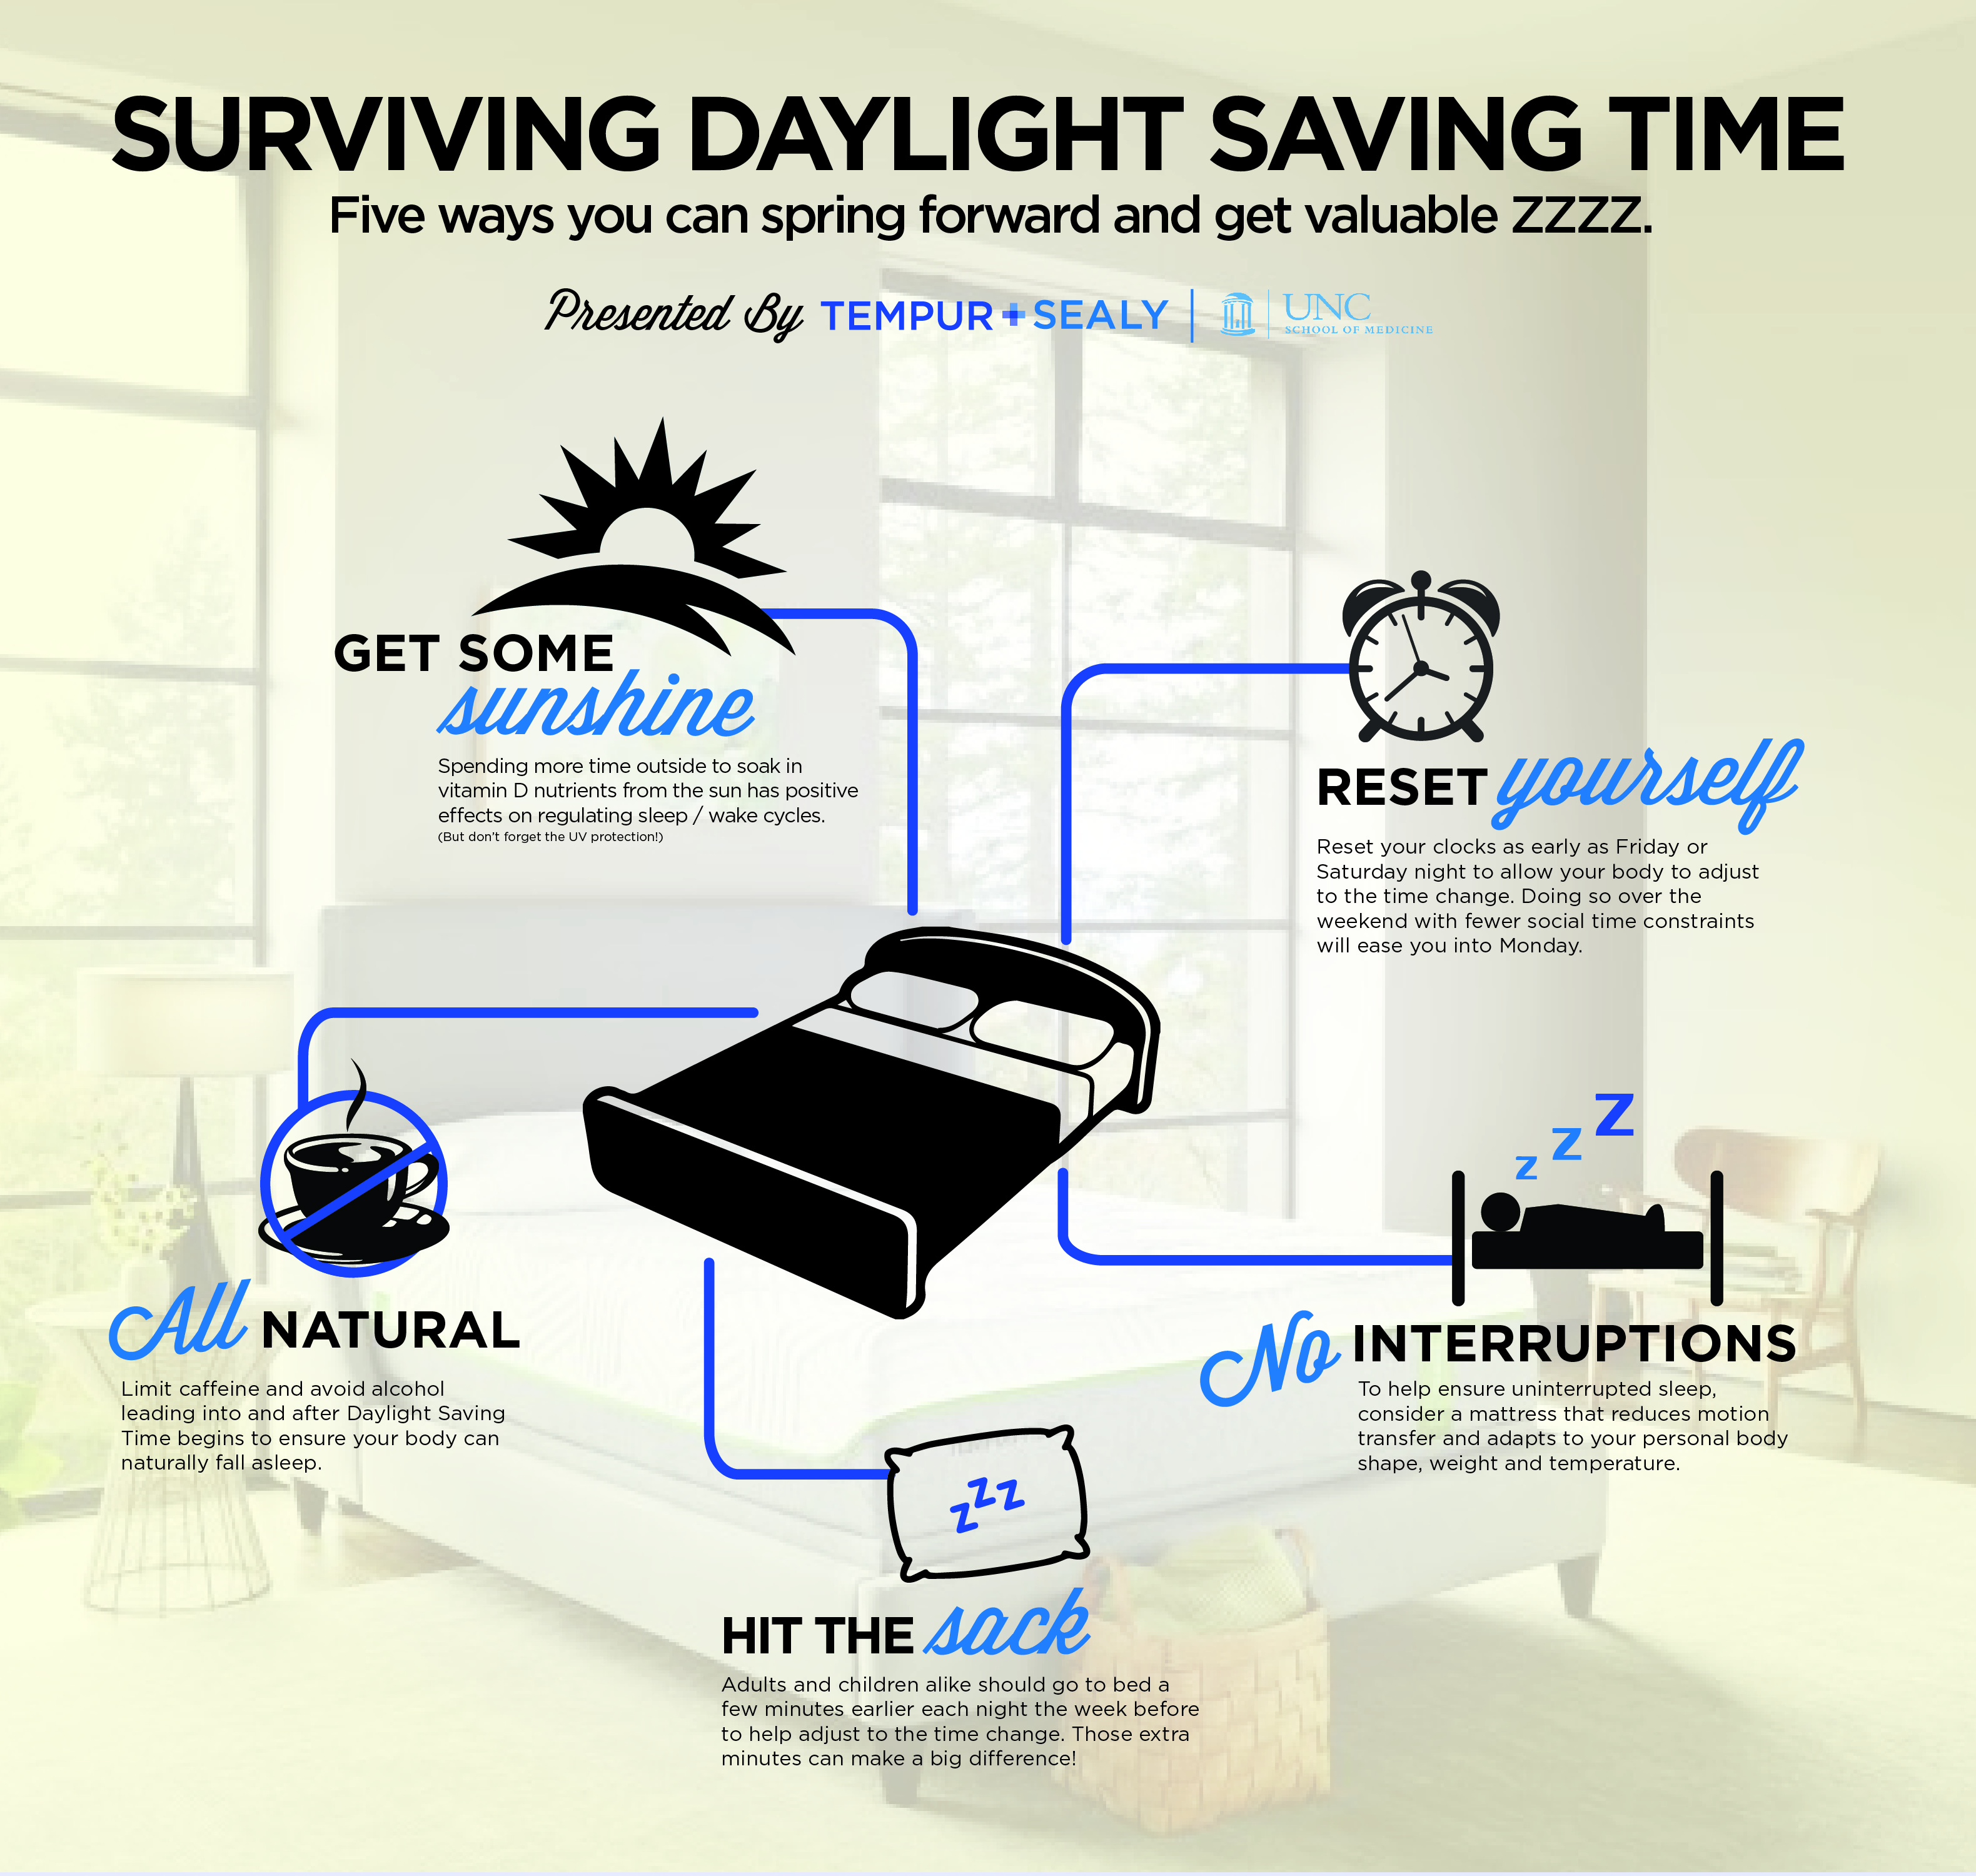 5 Ways To Survive The Start Of Daylight Saving Time | HuffPost Life